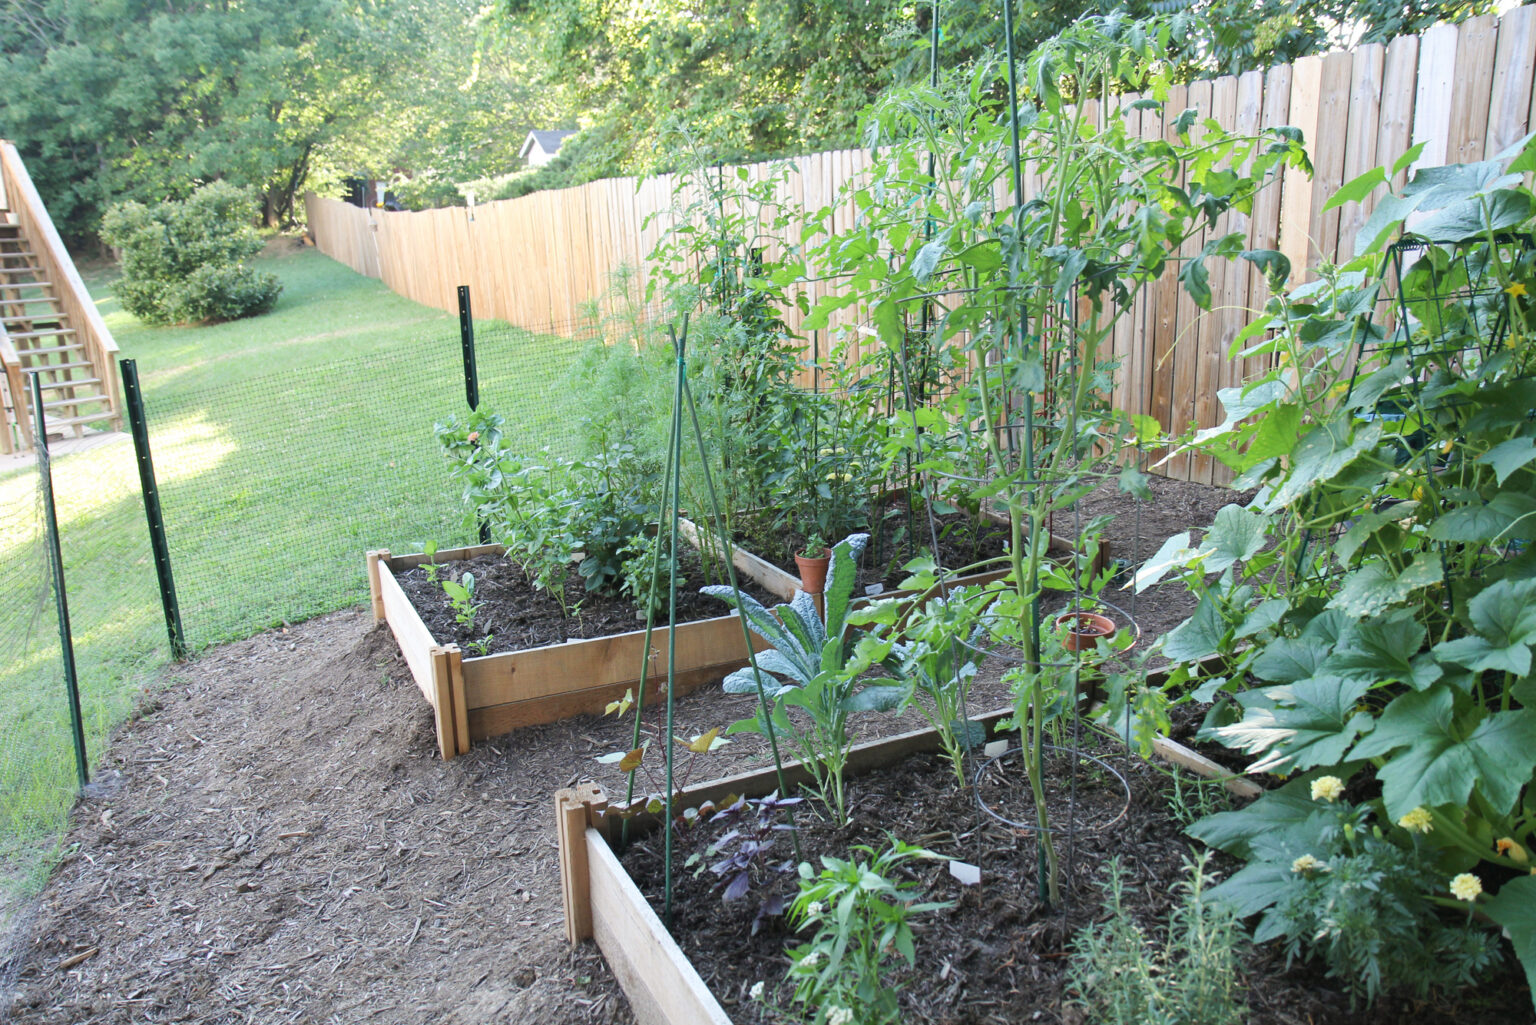 Starting a home garden from scratch – Whitney Anderson